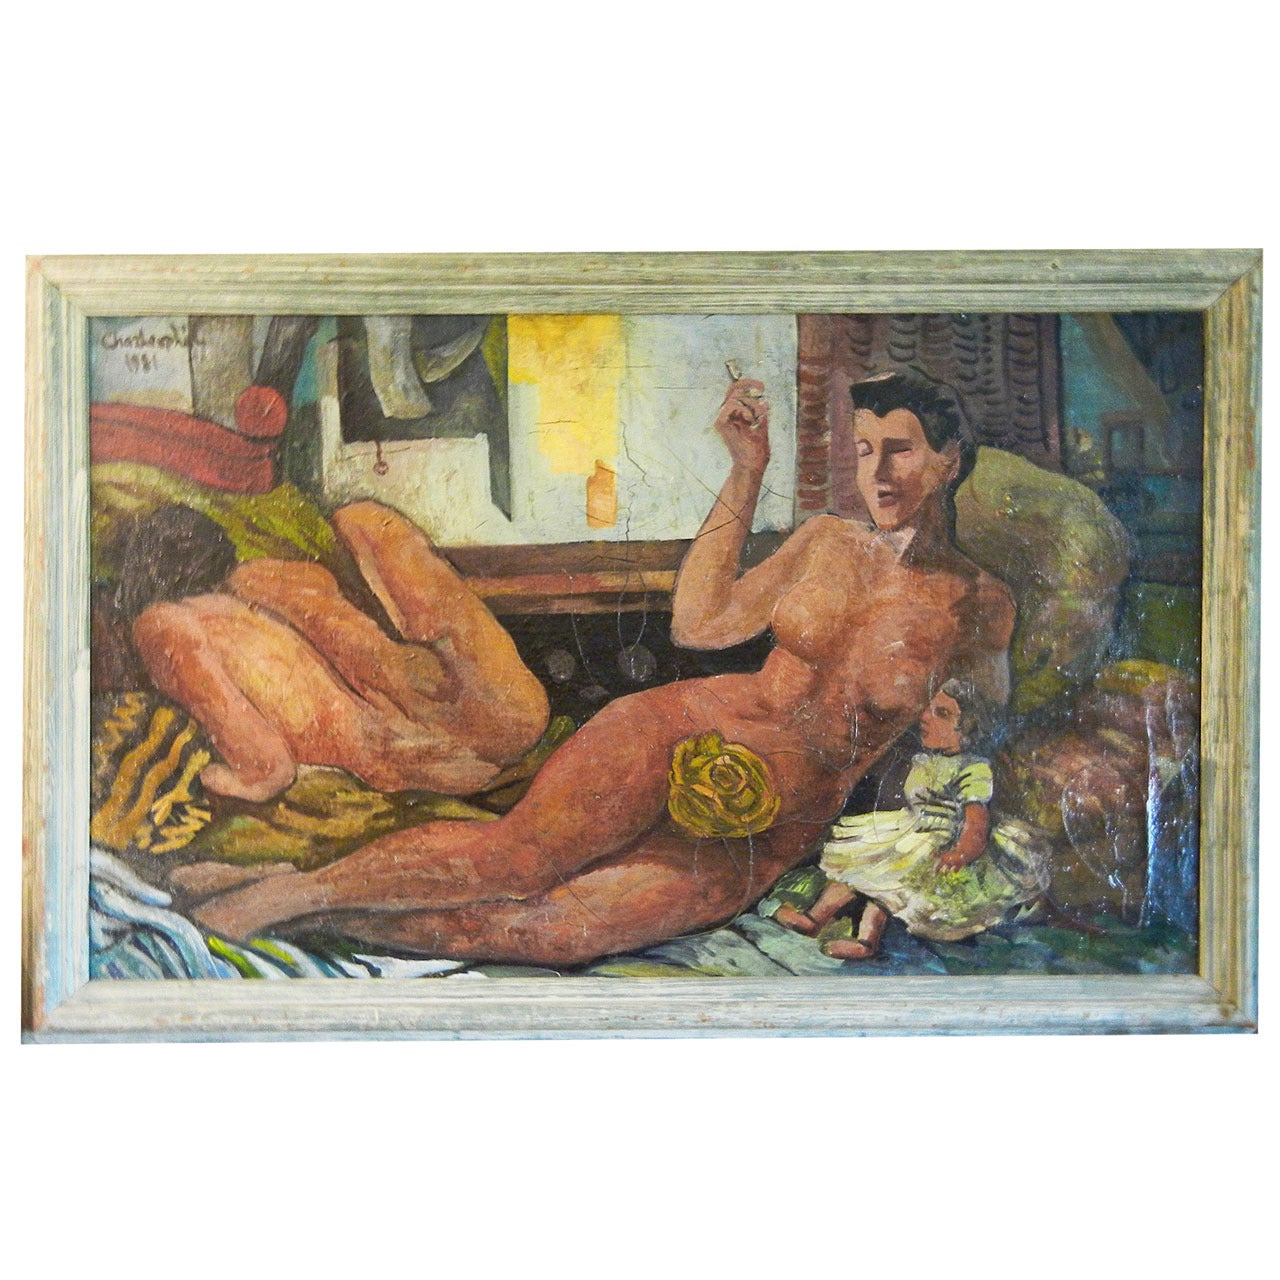 "After, " Large, Allegorical Painting with Nudes For Sale